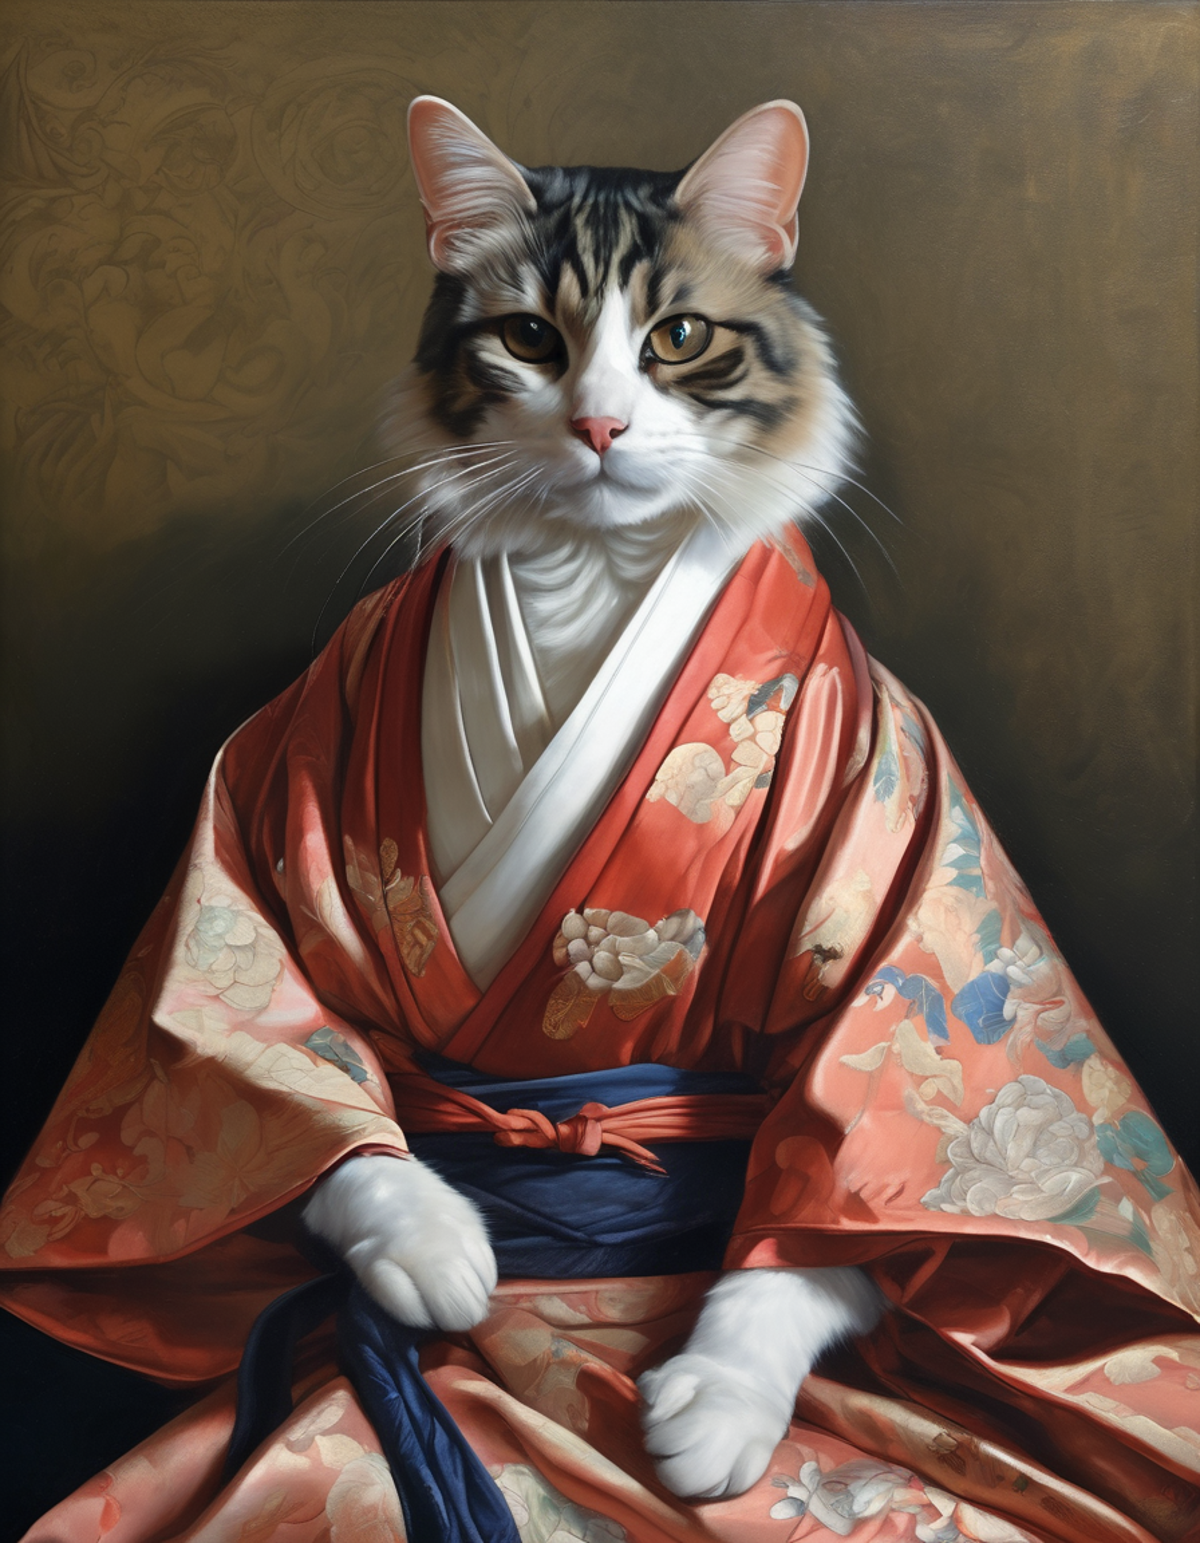 A cat wearing a kimono, sitting on a table.